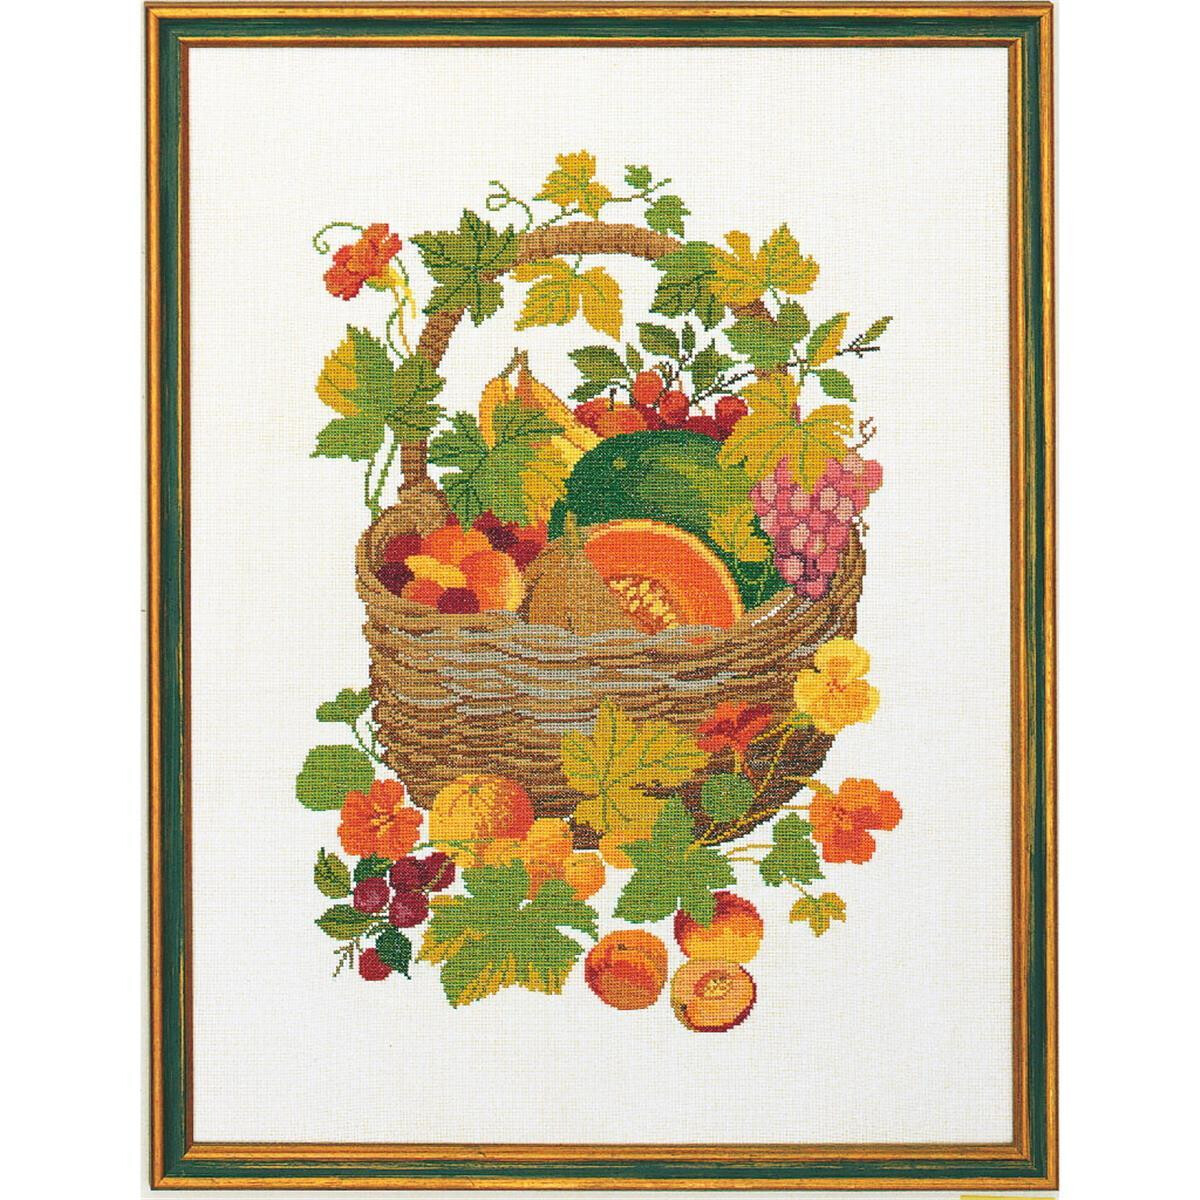 Eva Rosenstand counted cross stitch kit "Basket with...